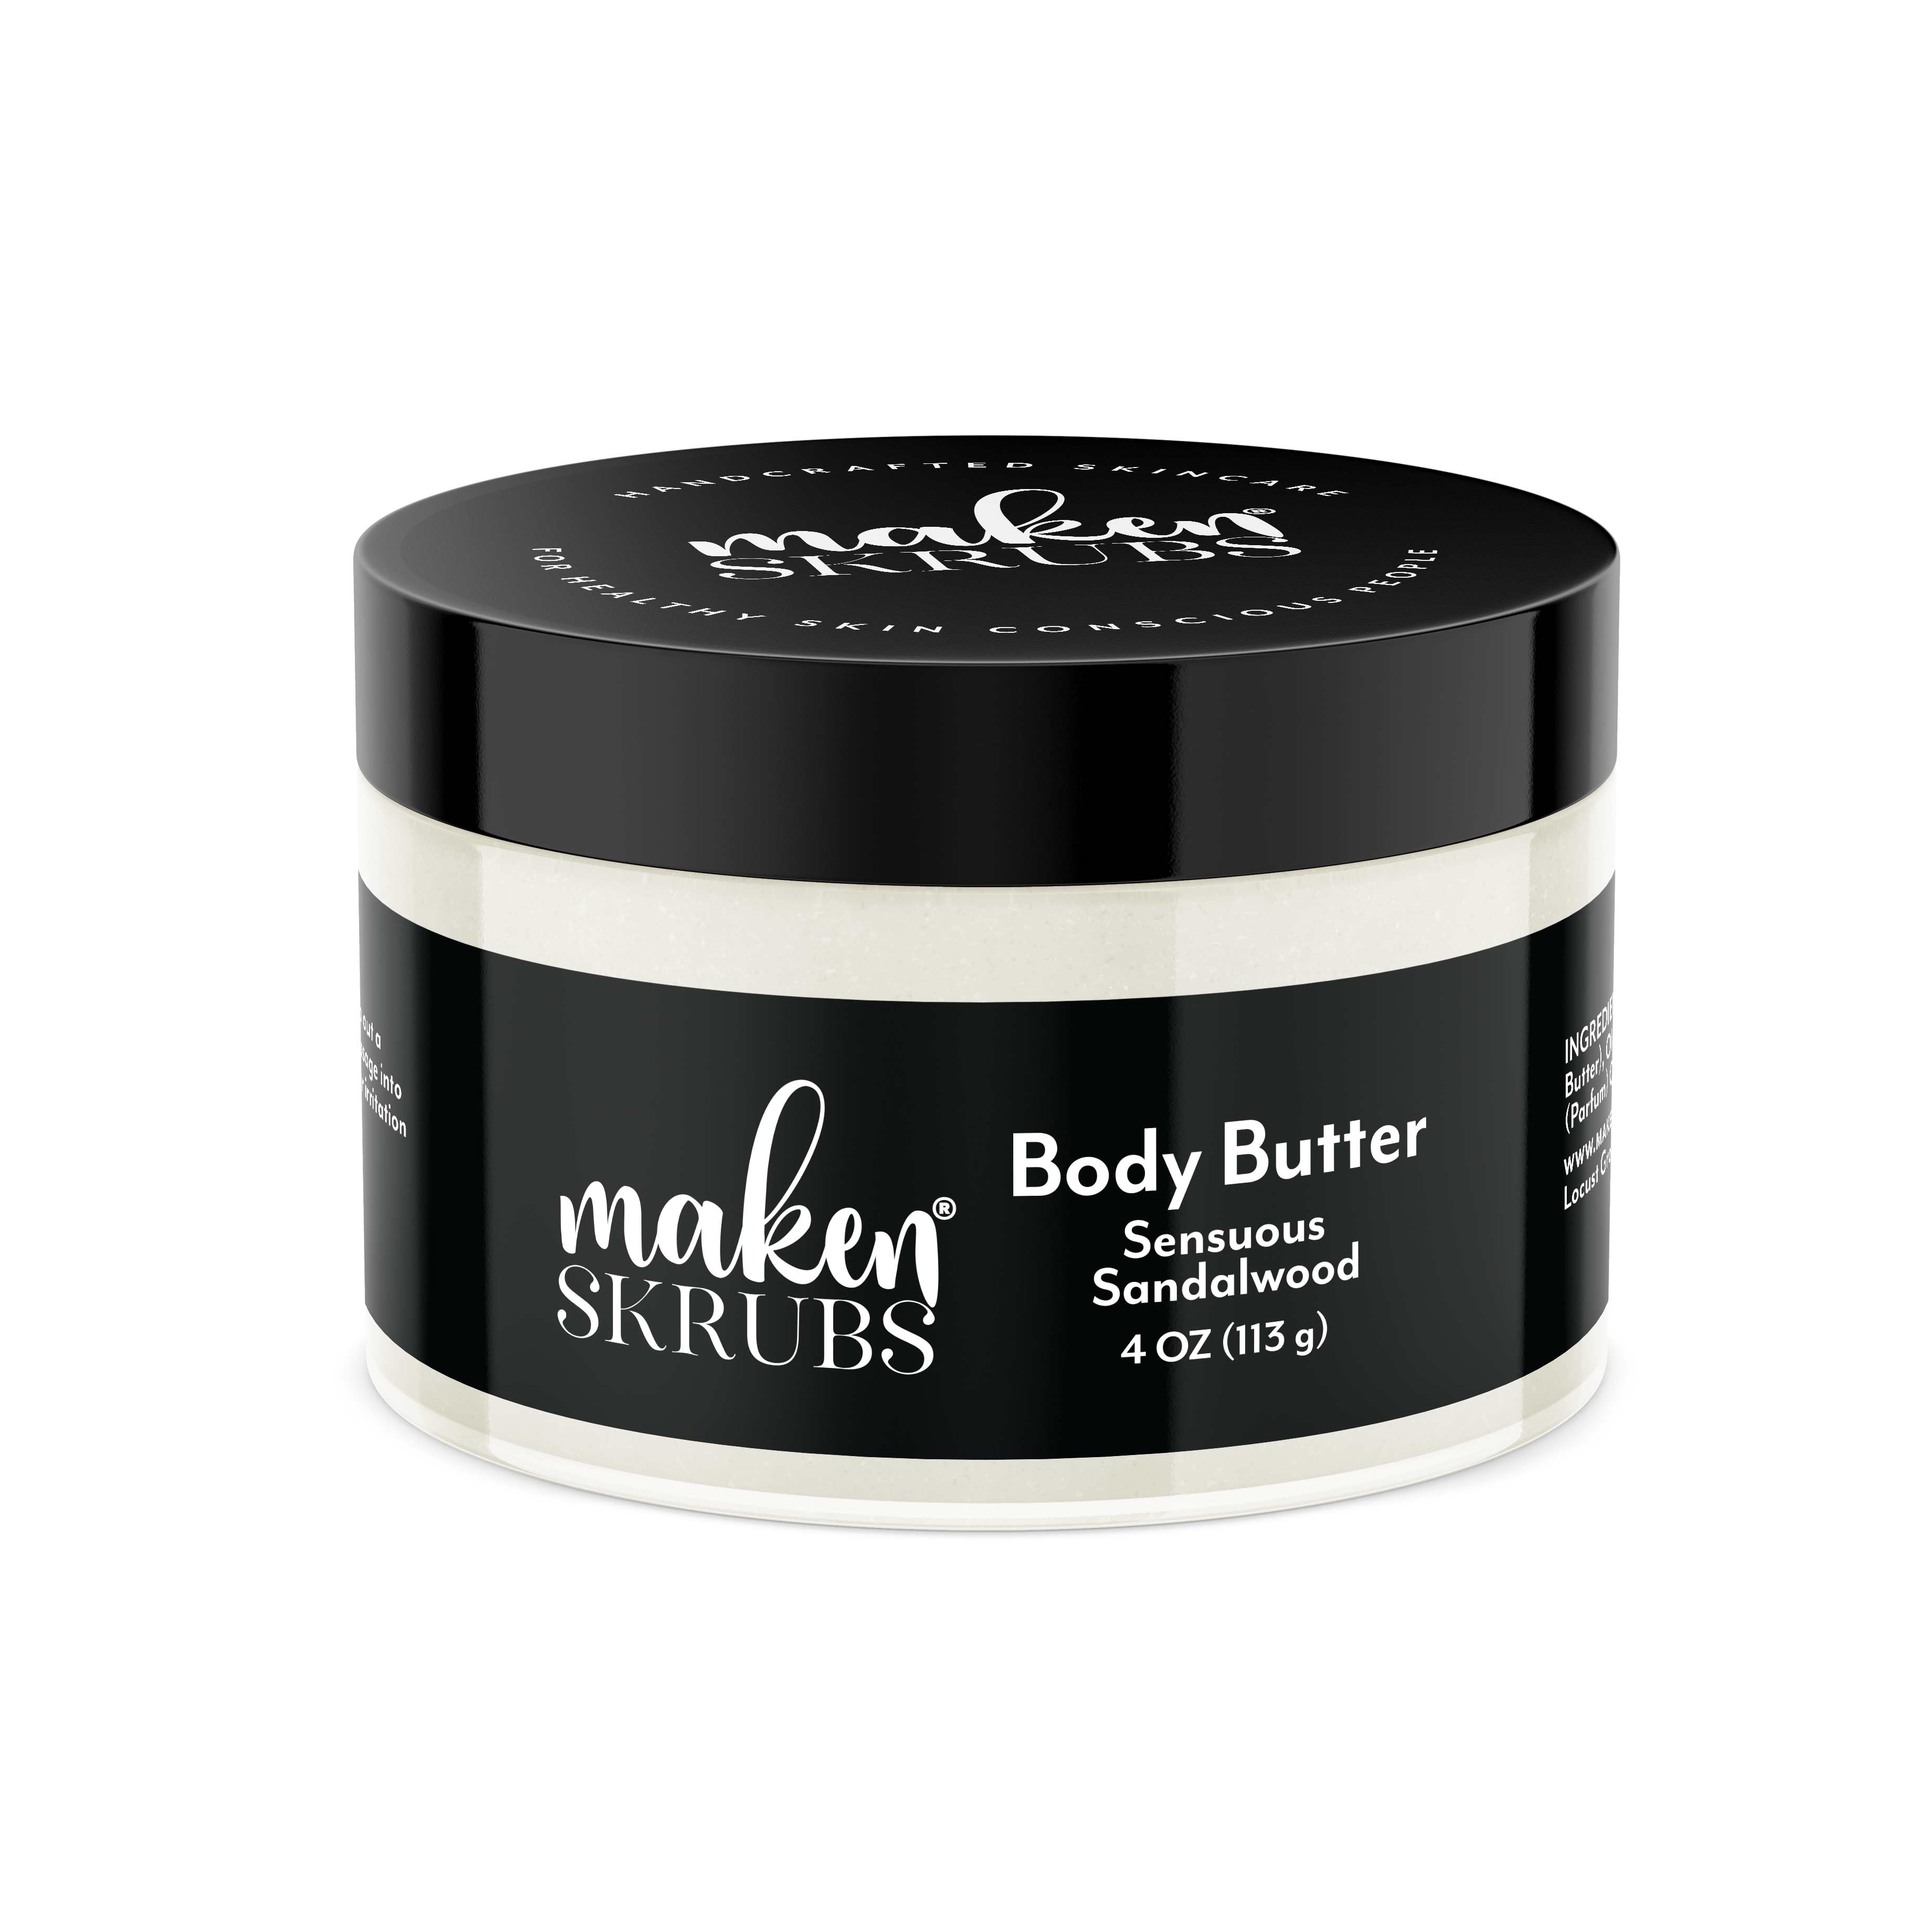 Sensuous Sandalwood Whipped Body Butter